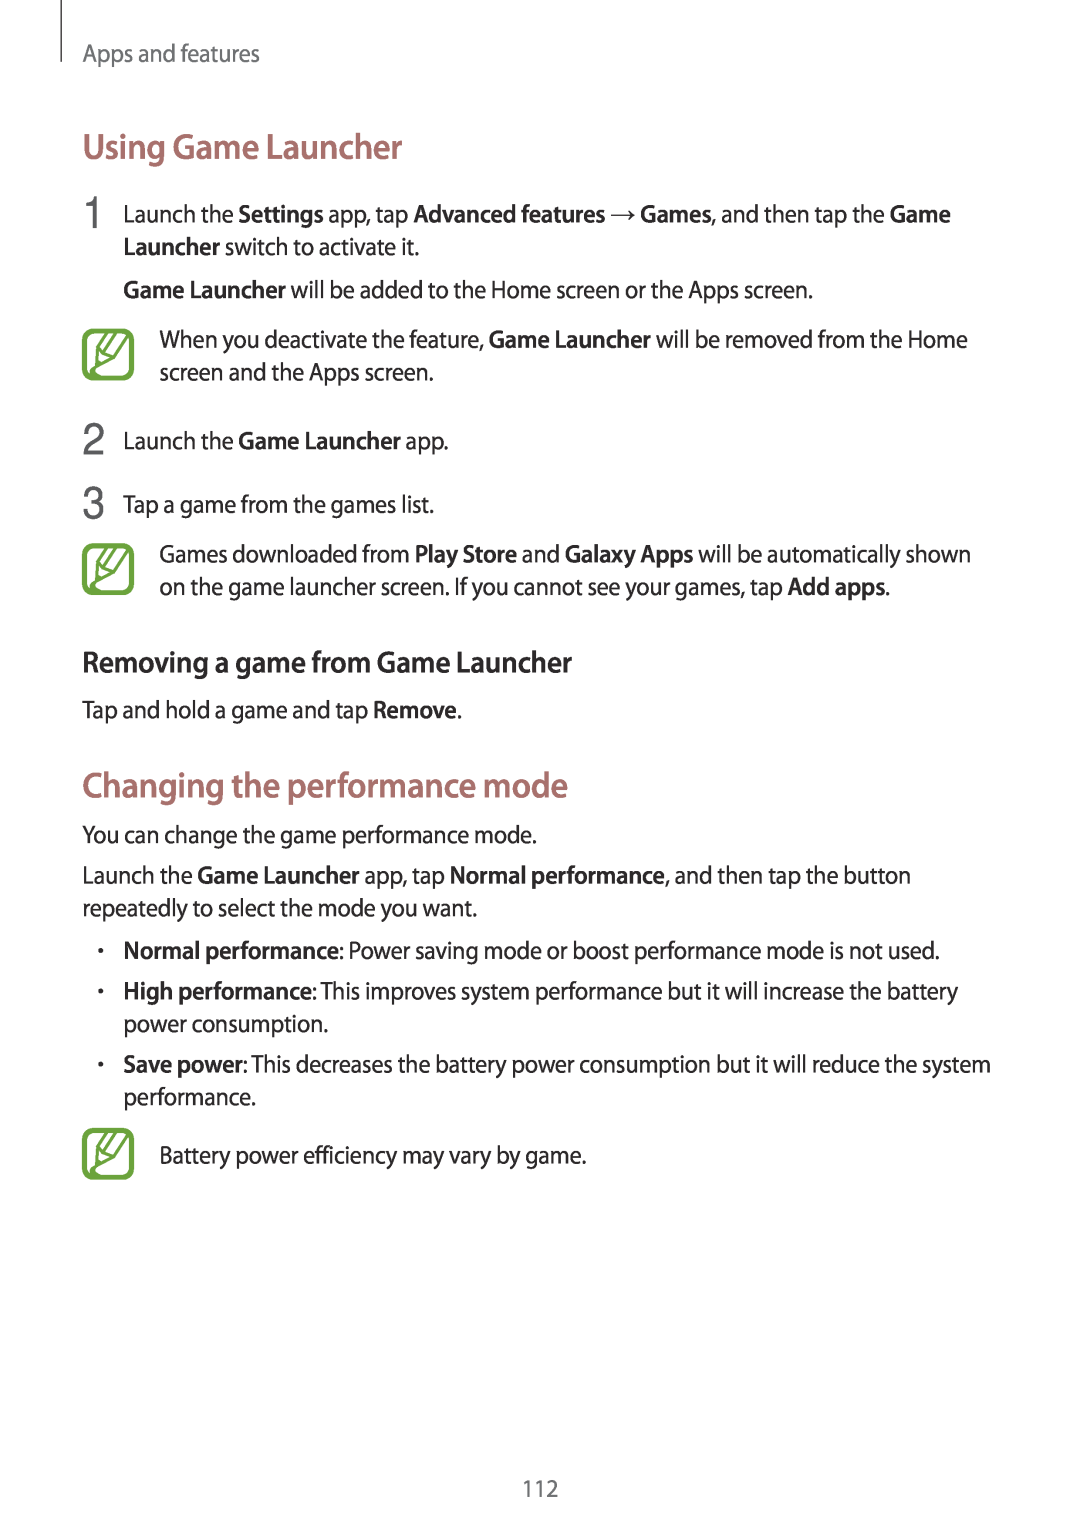 Samsung SM-A520FZDDSER manual Using Game Launcher, Changing the performance mode, Removing a game from Game Launcher 